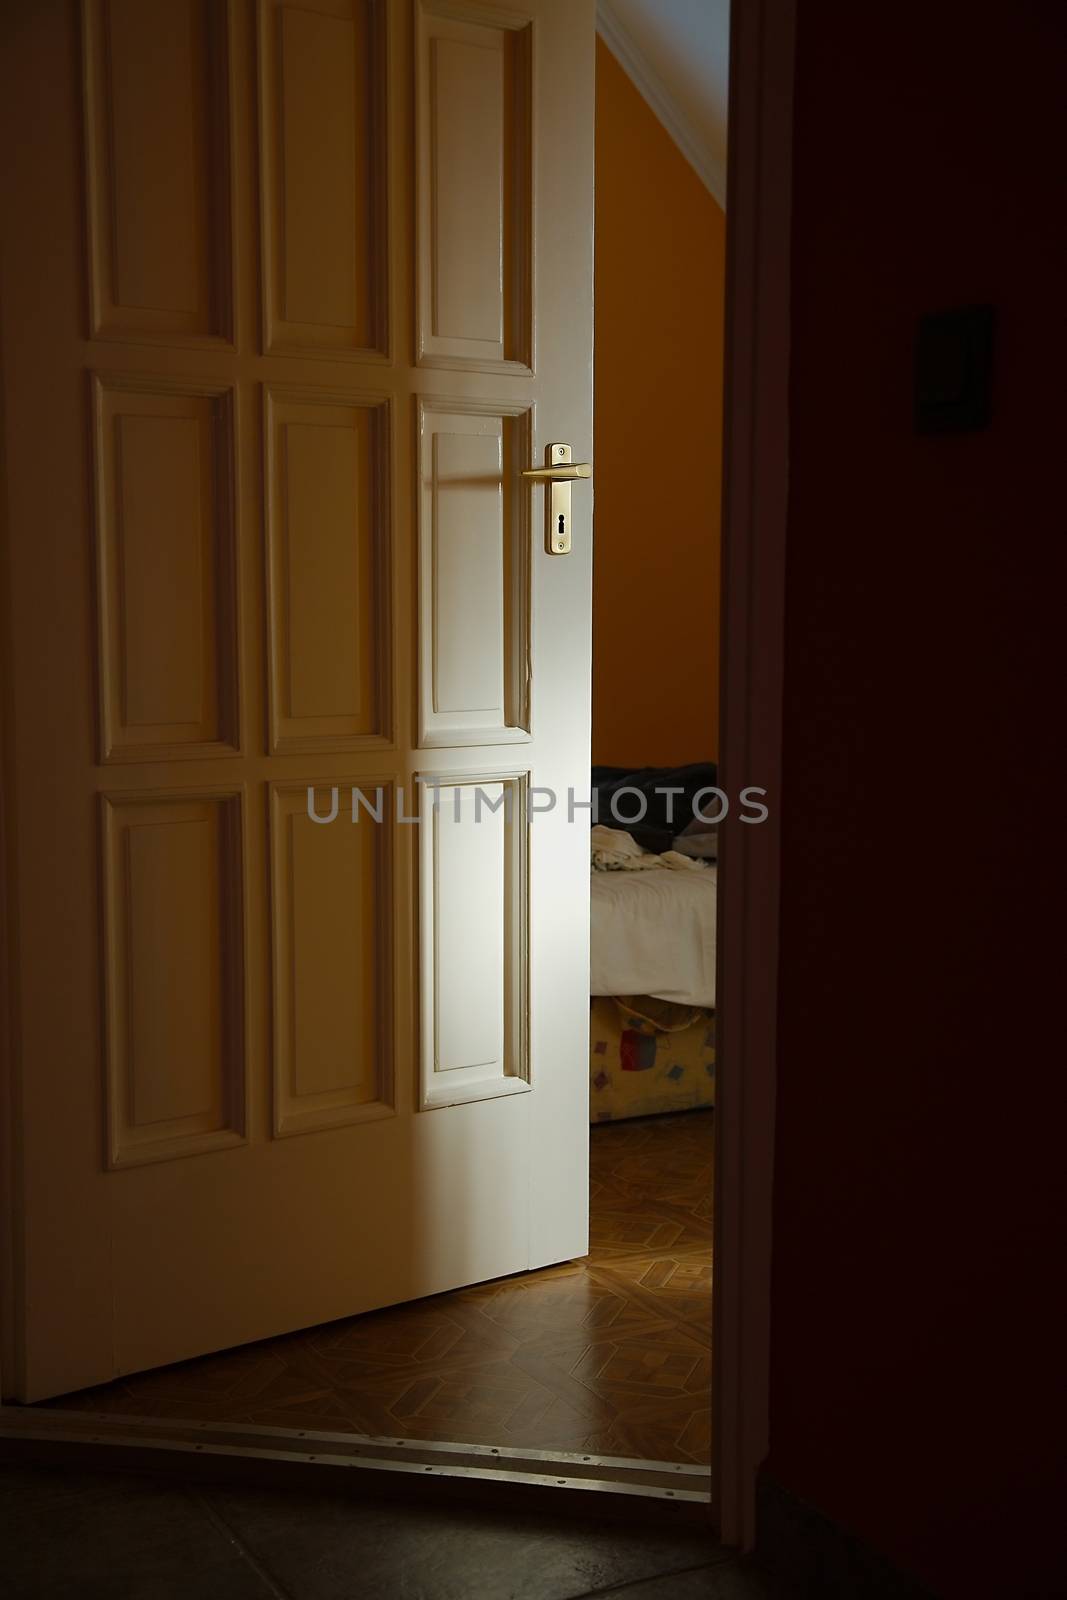 Light coming from a room with door left ajar